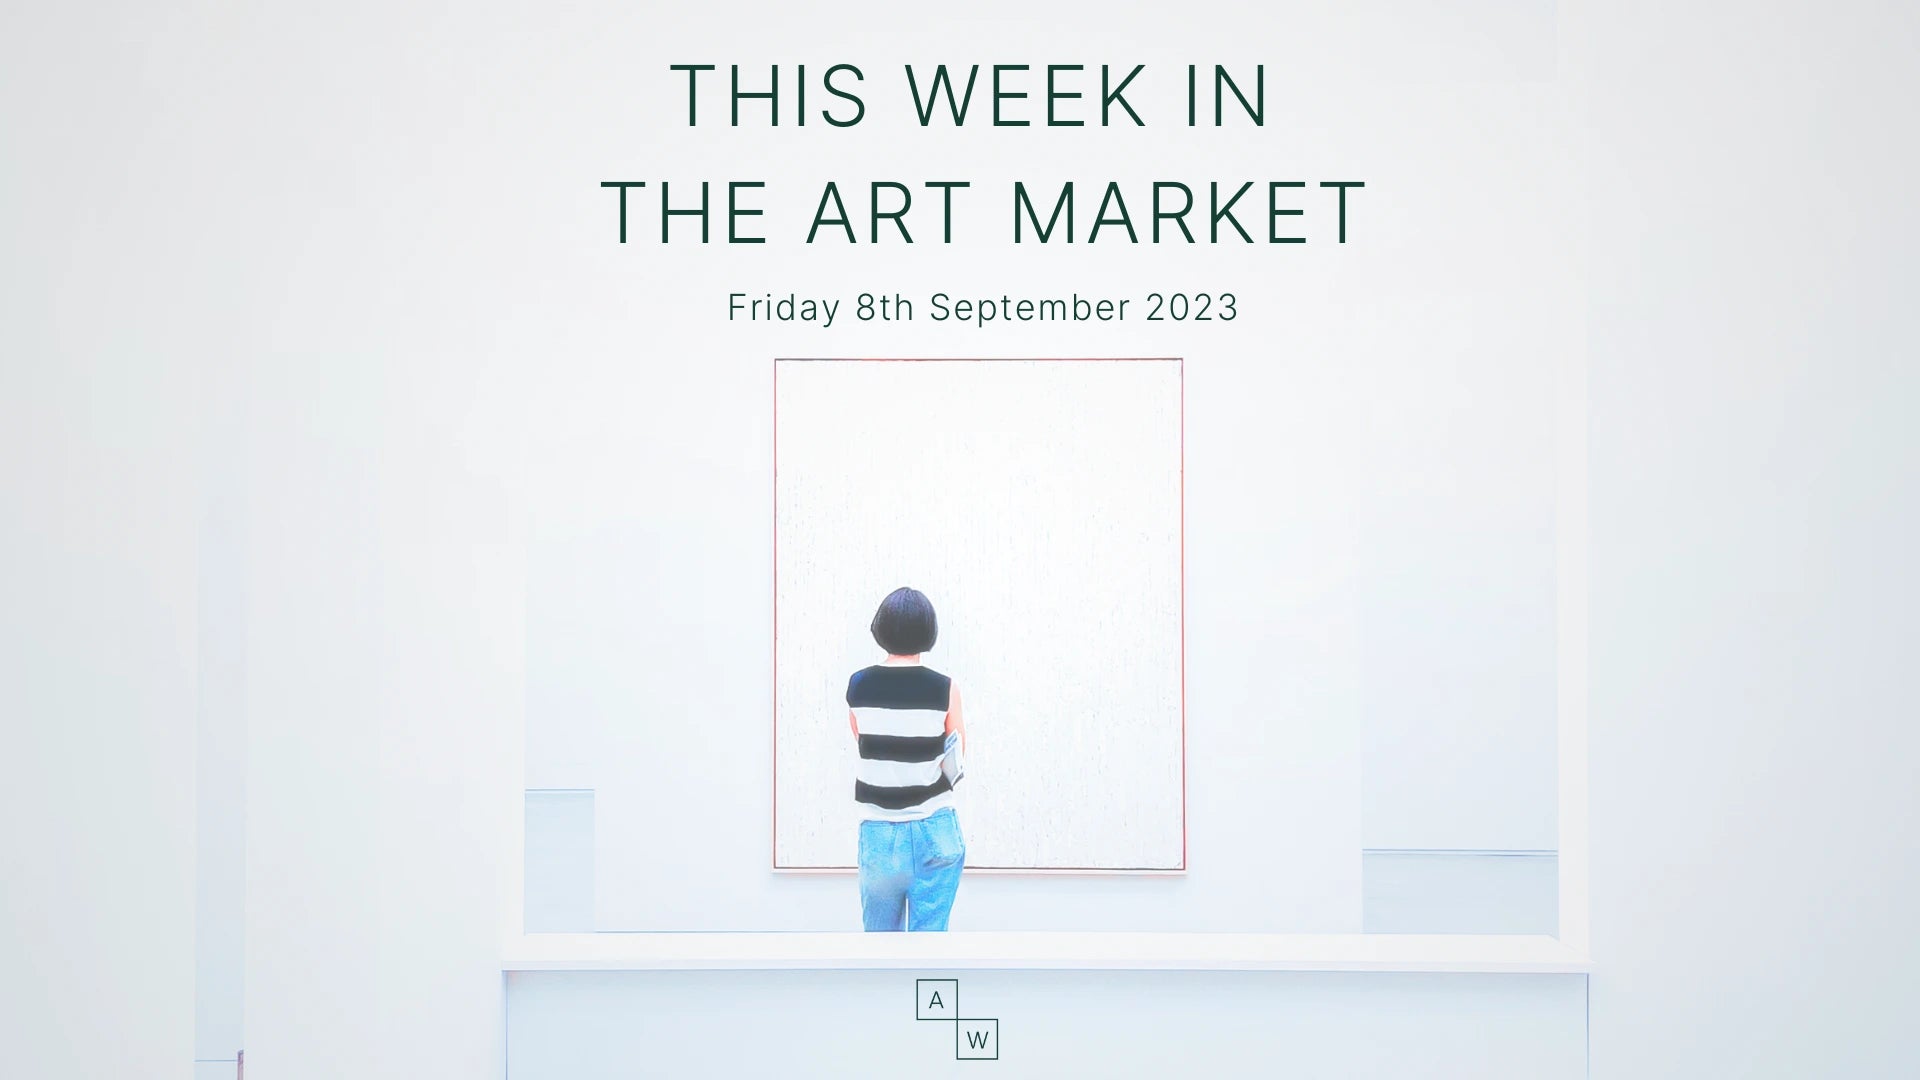 This Week in the Art Market - Friday 8th September